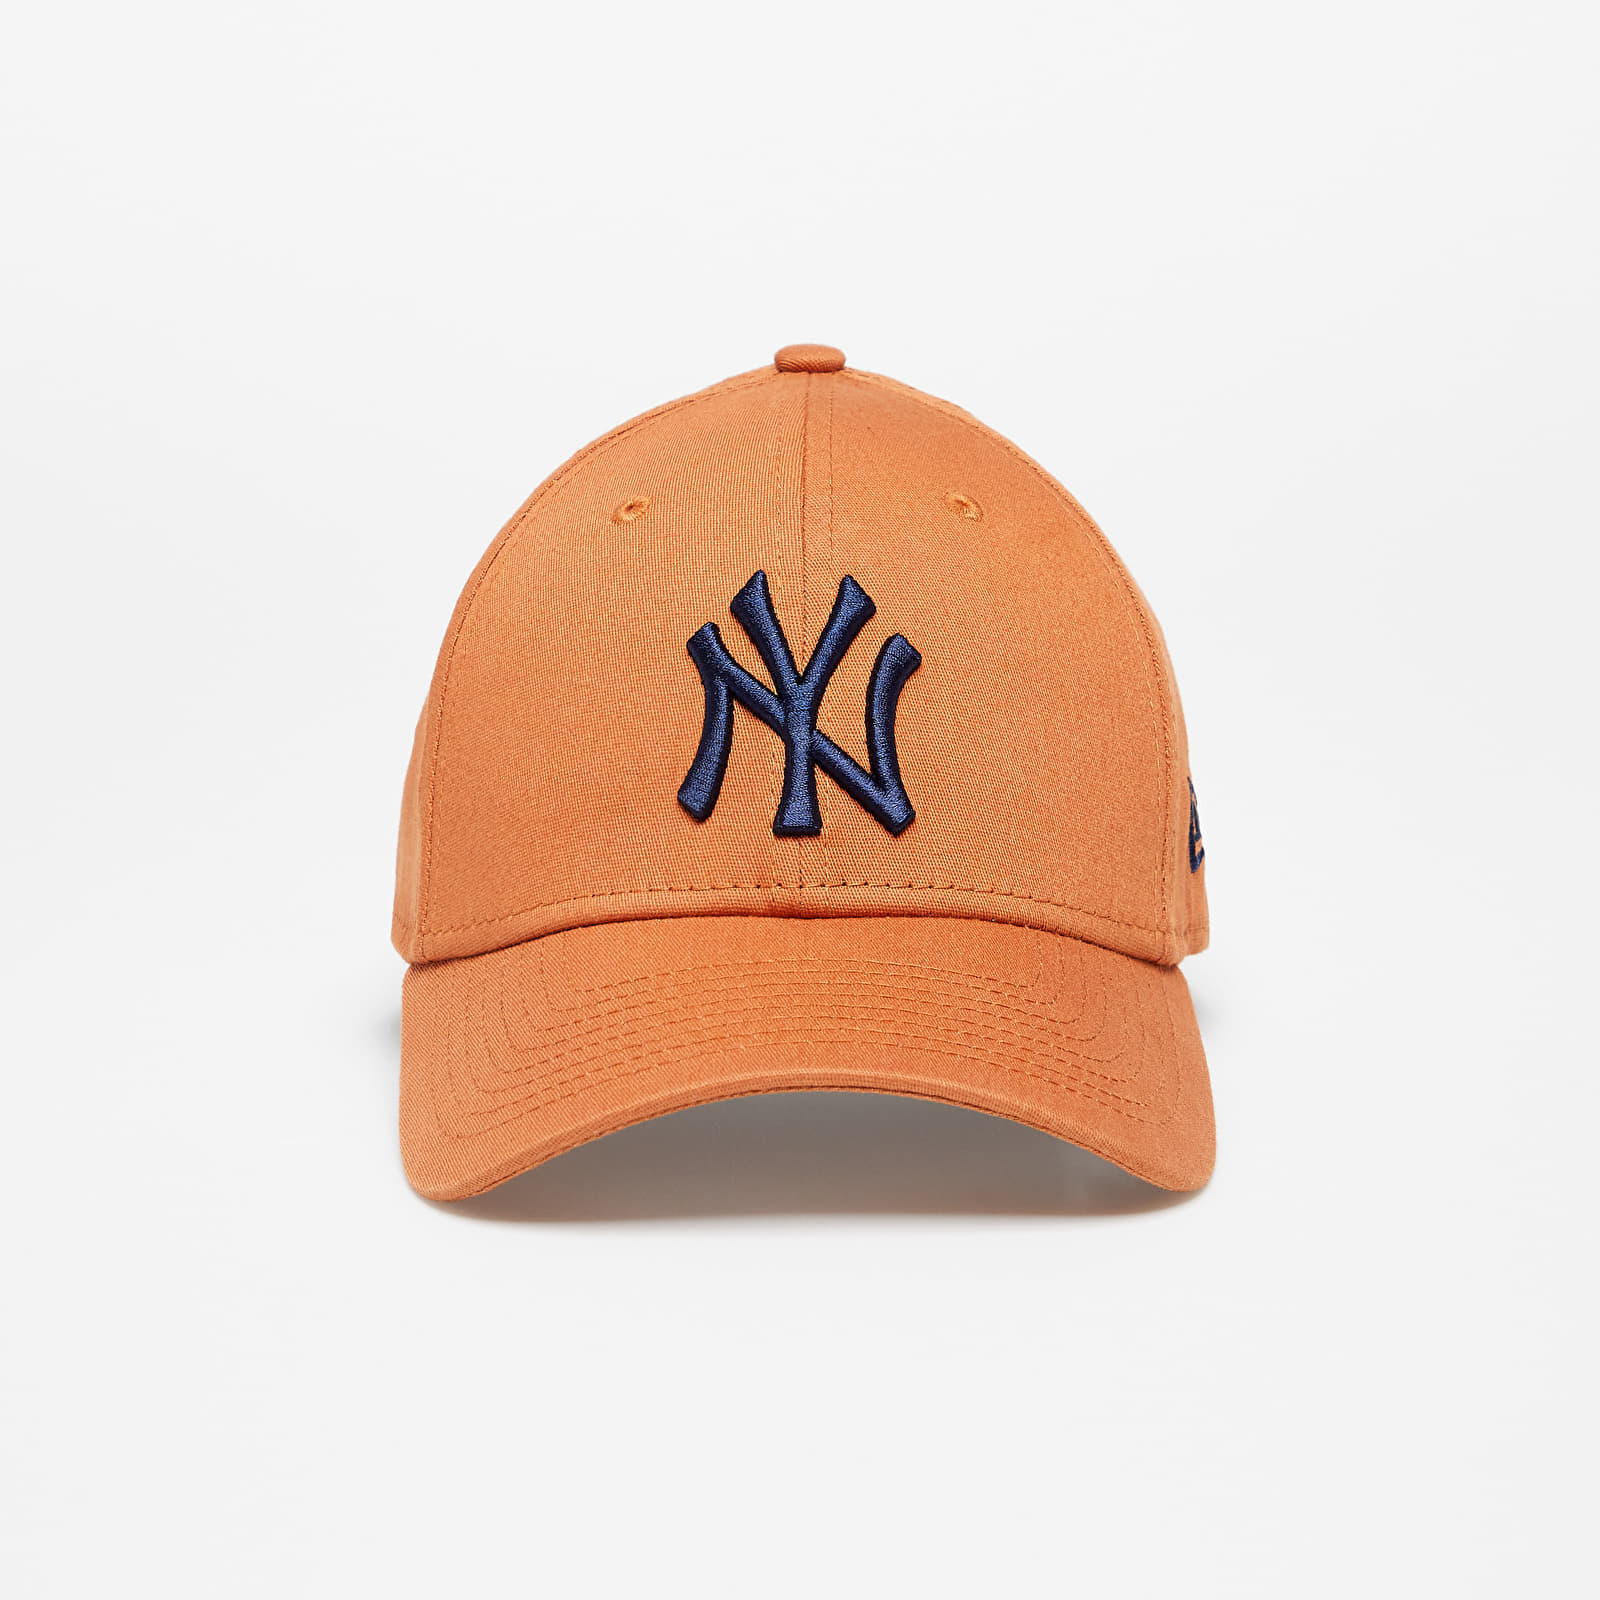 Caps New Era New York Yankees League Essential 39THIRTY Stretch Fit Cap Brown